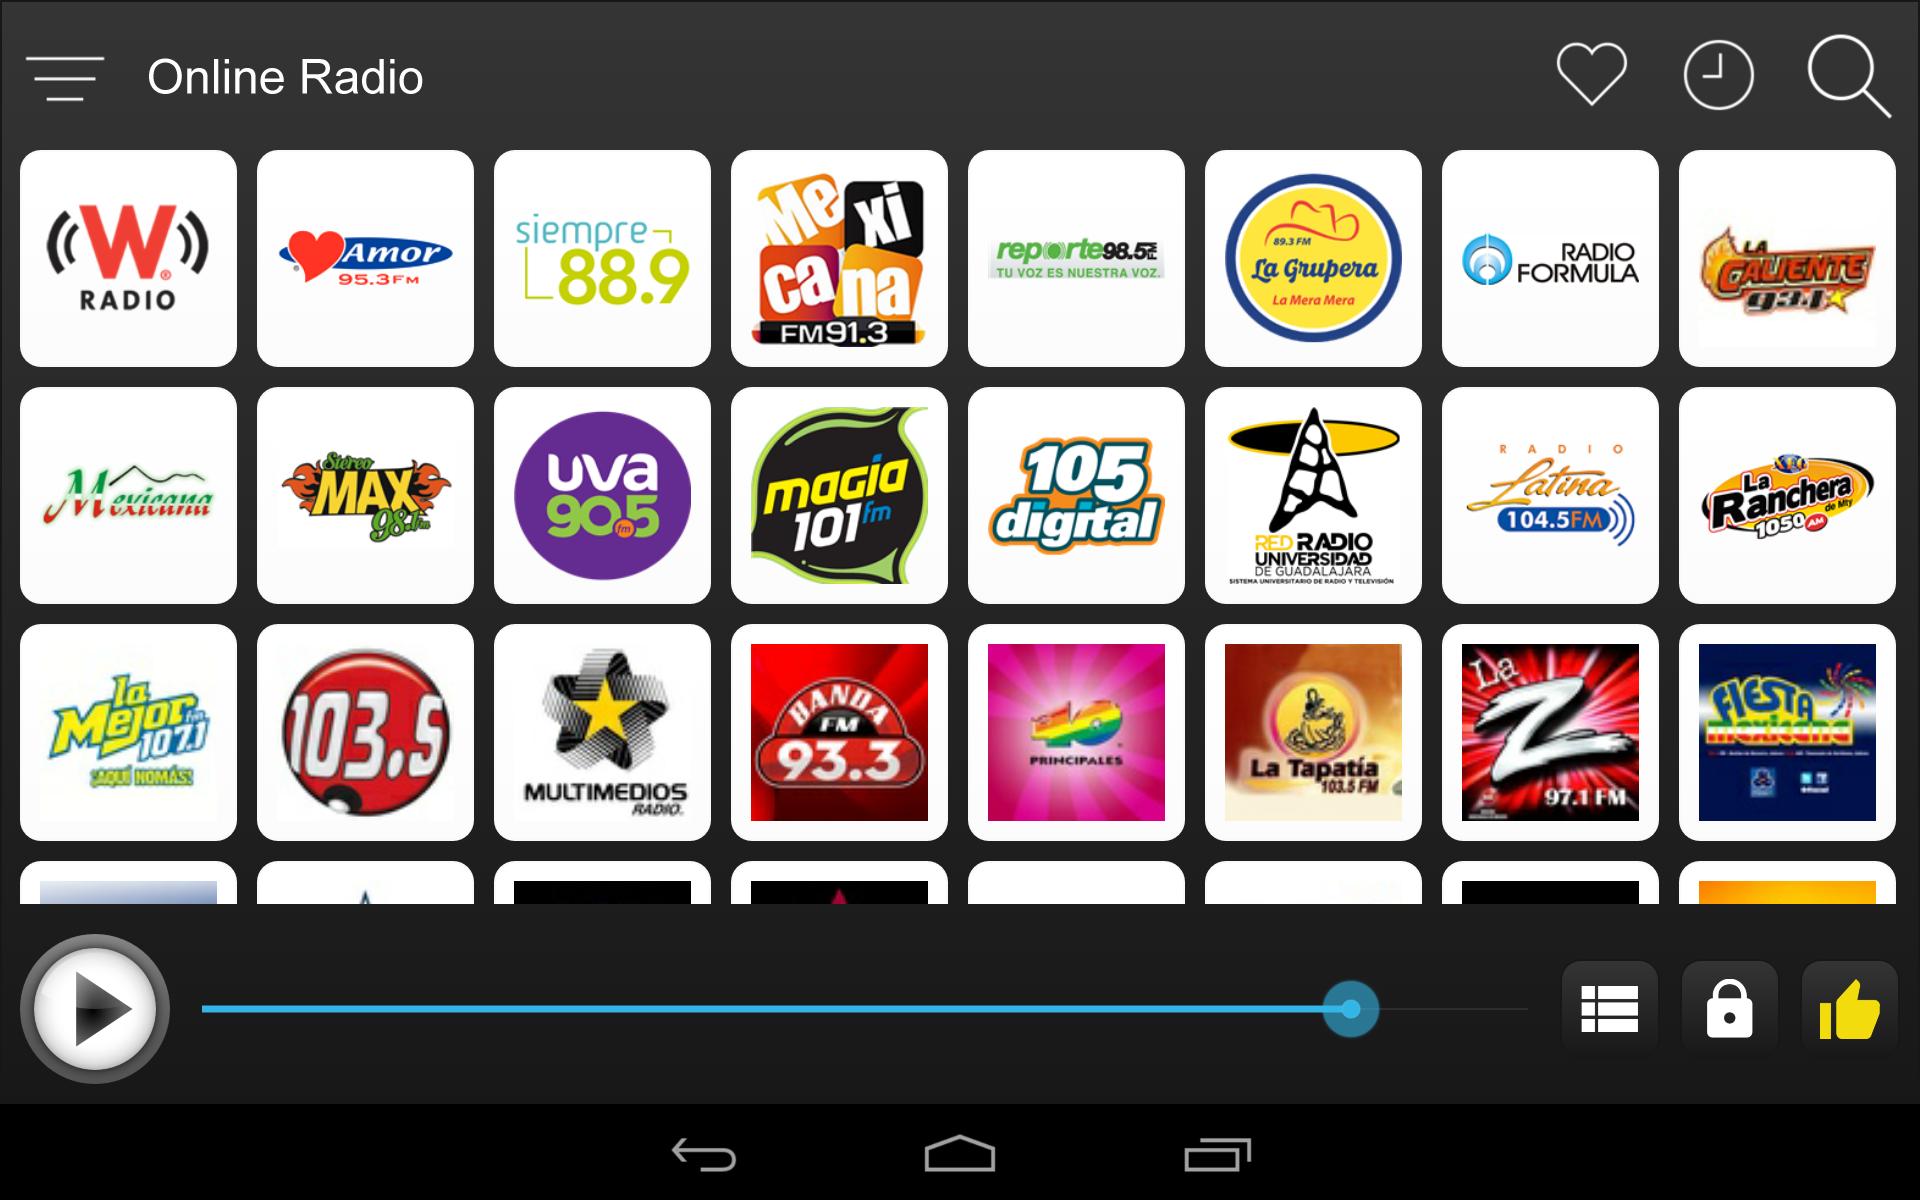 Lithuania Radio Station - Lithuania FM AM Online for Android - APK Download